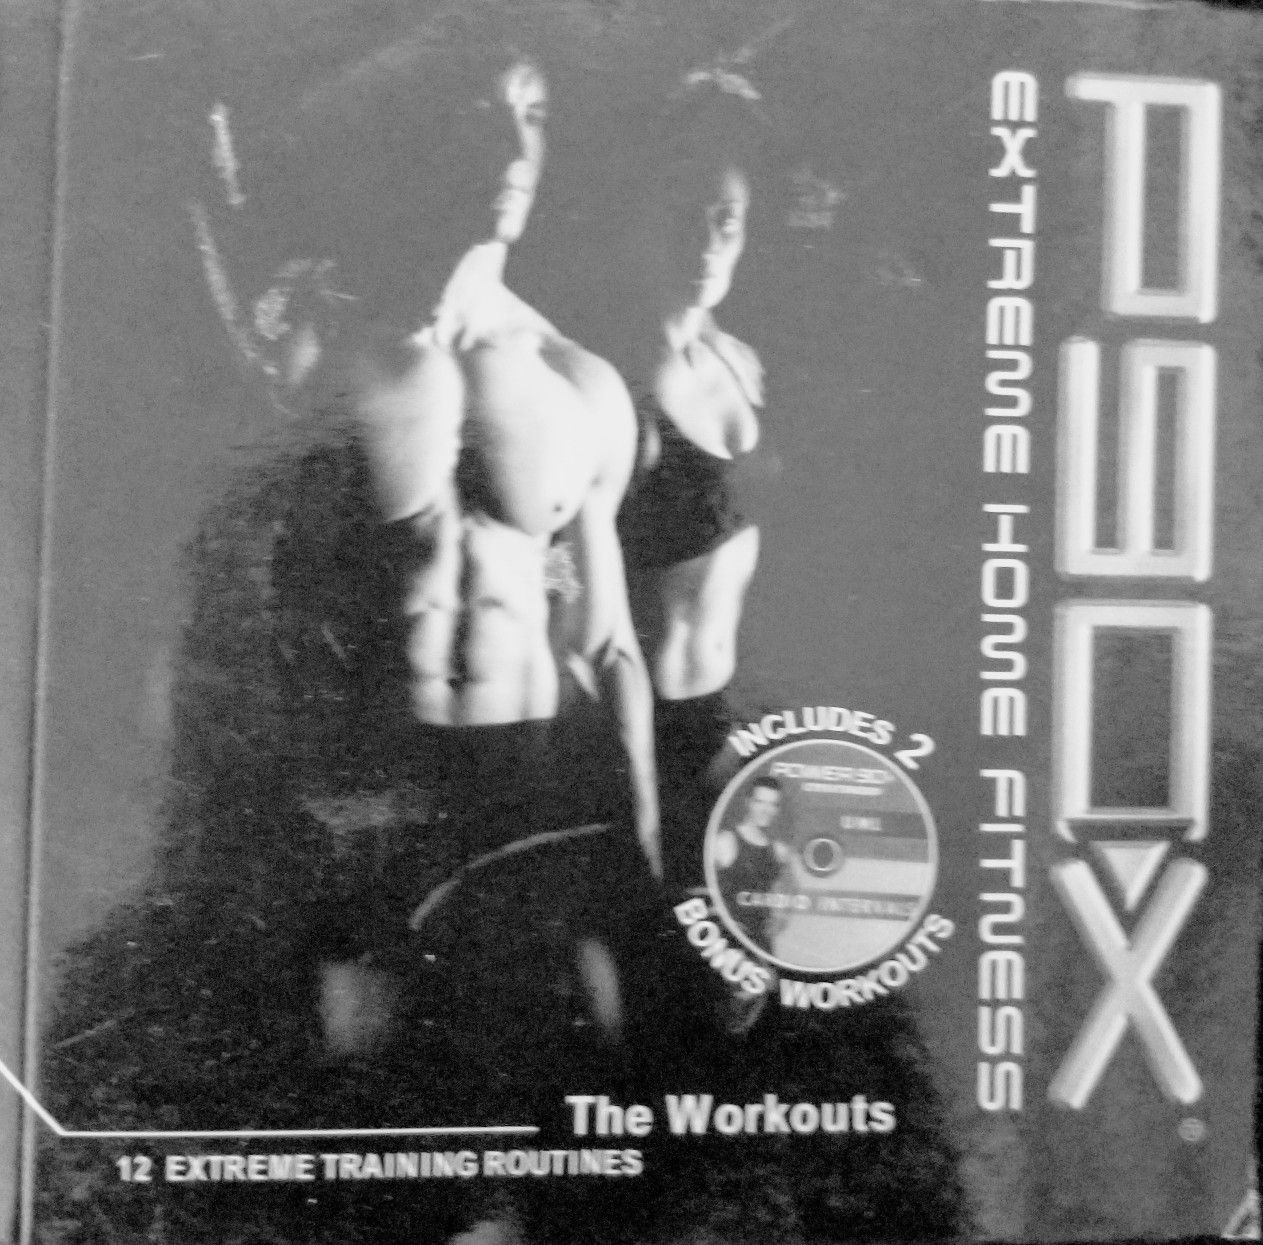 P90X extreme home fitness $20